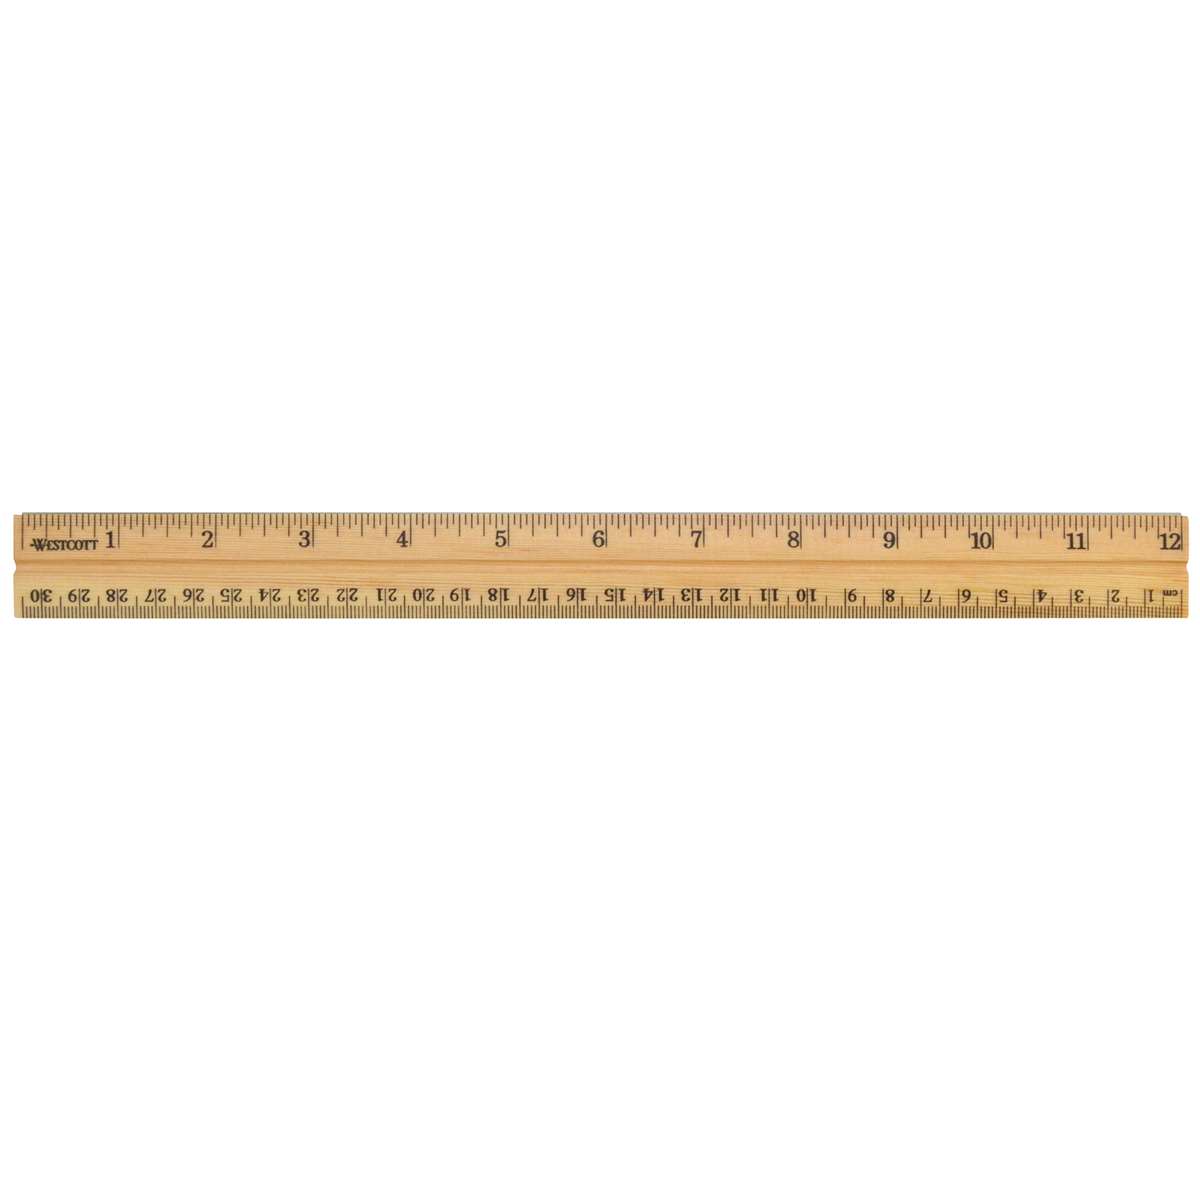 Ruler Measurement Tools: Printable Rulers (9 Inches and 22